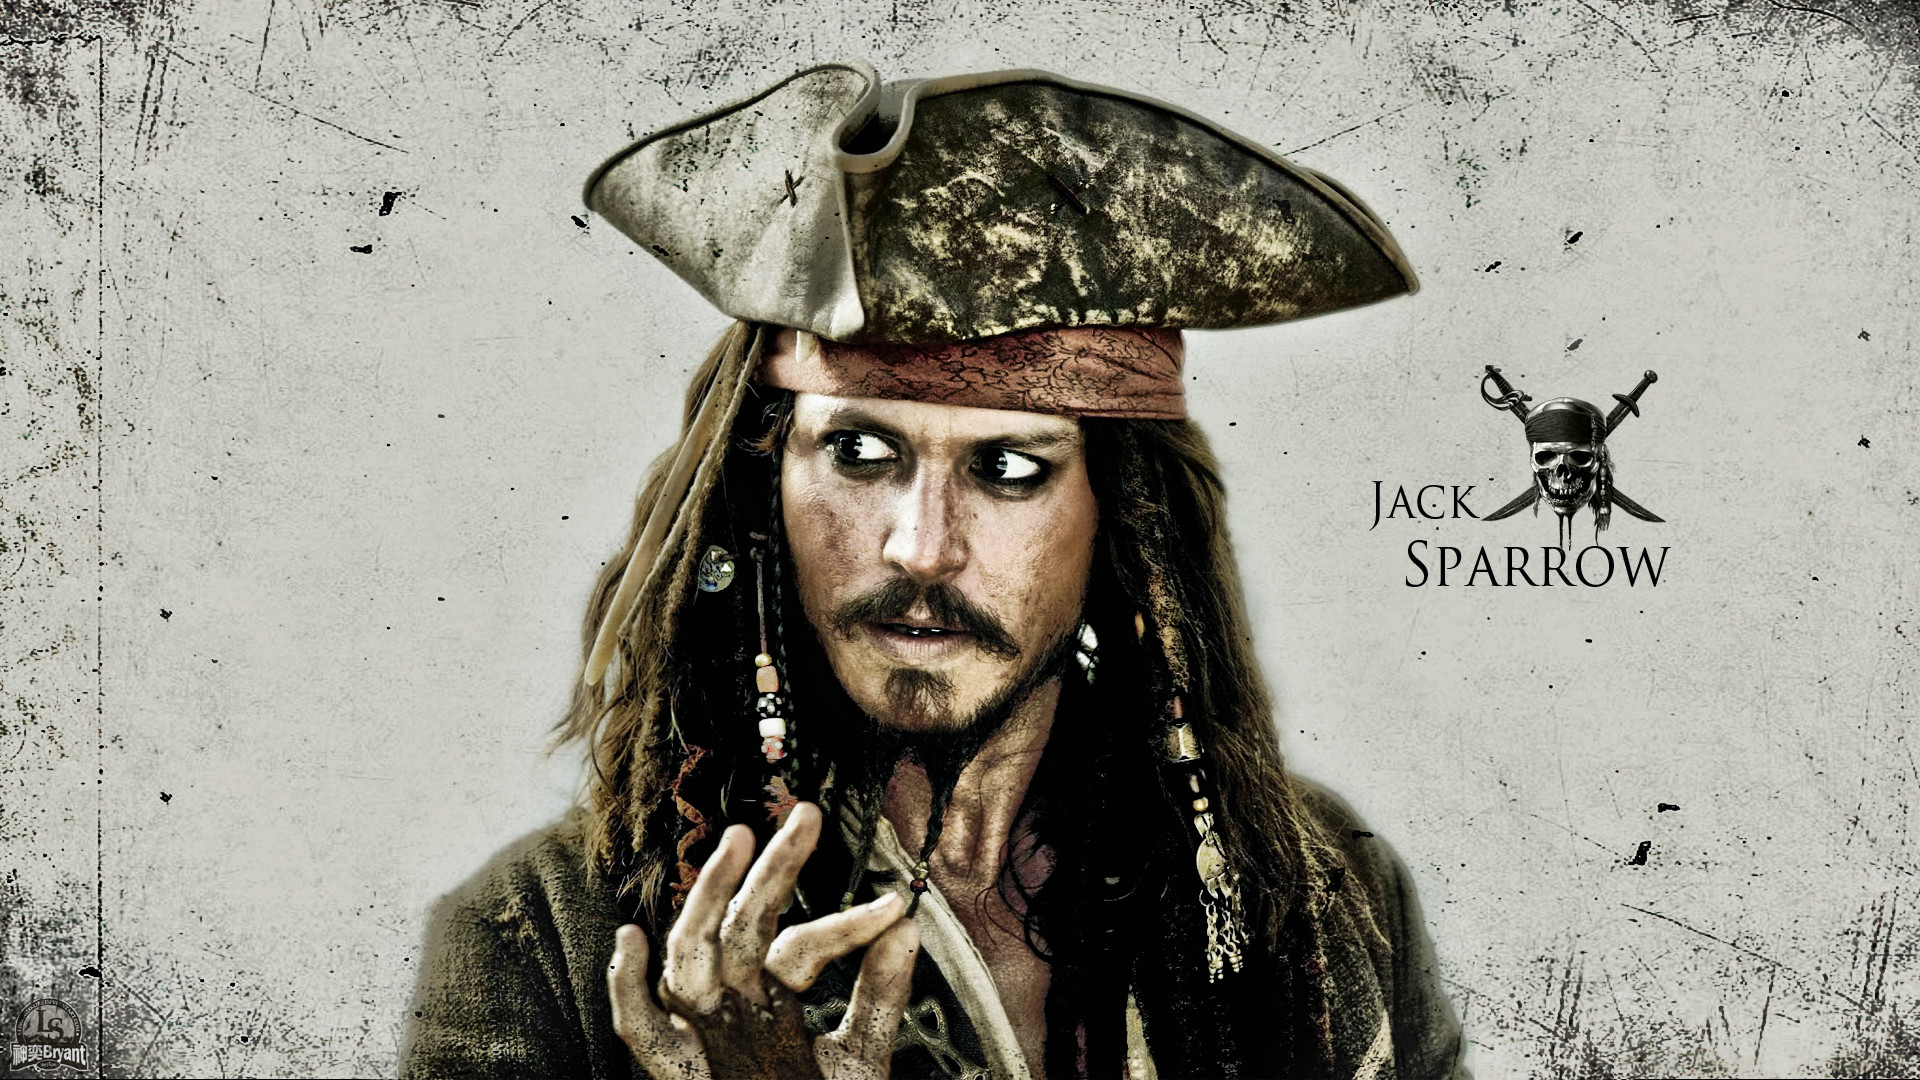 1920x1080 ...  Pirates of the Caribbean Jack Sparrow Pirate Johnny Depp  wallpaper.